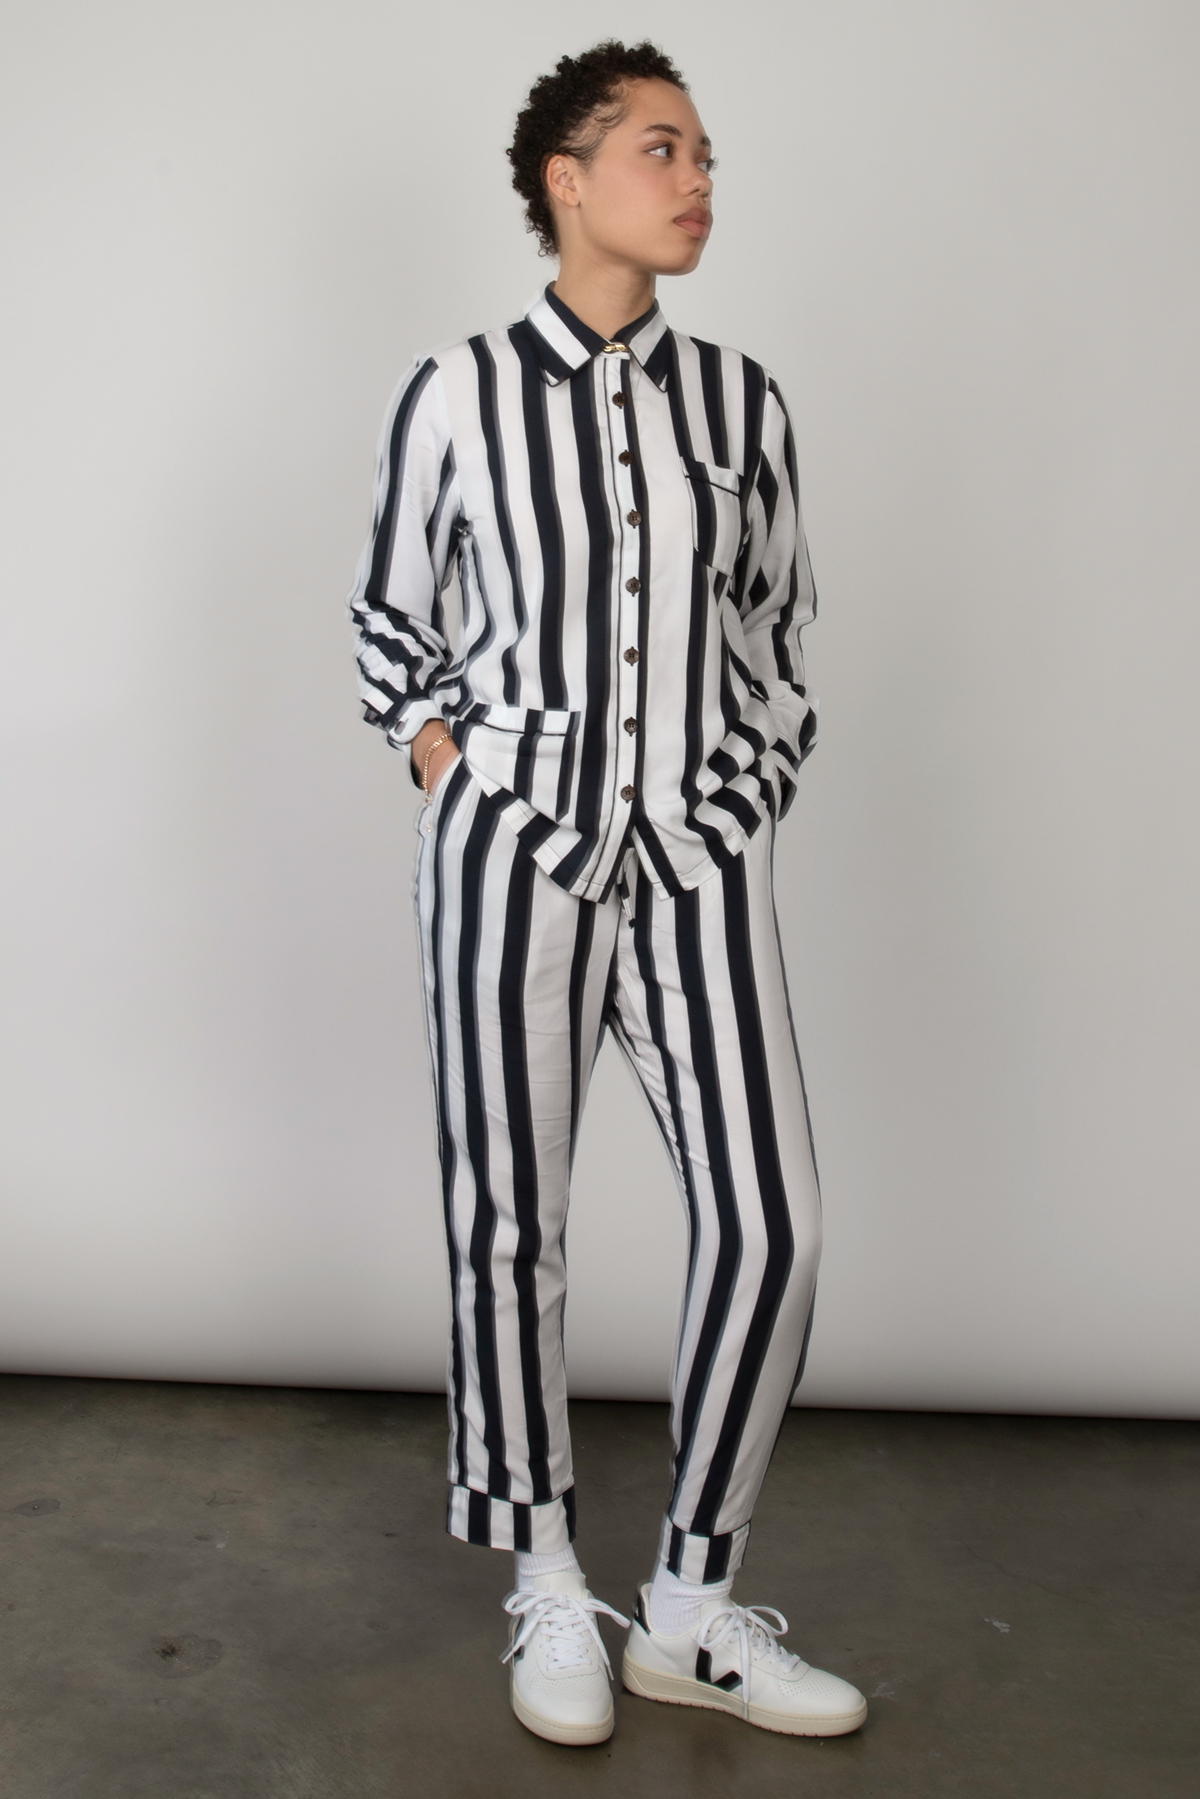 Black and white striped long-sleeve pajama set with black piping.